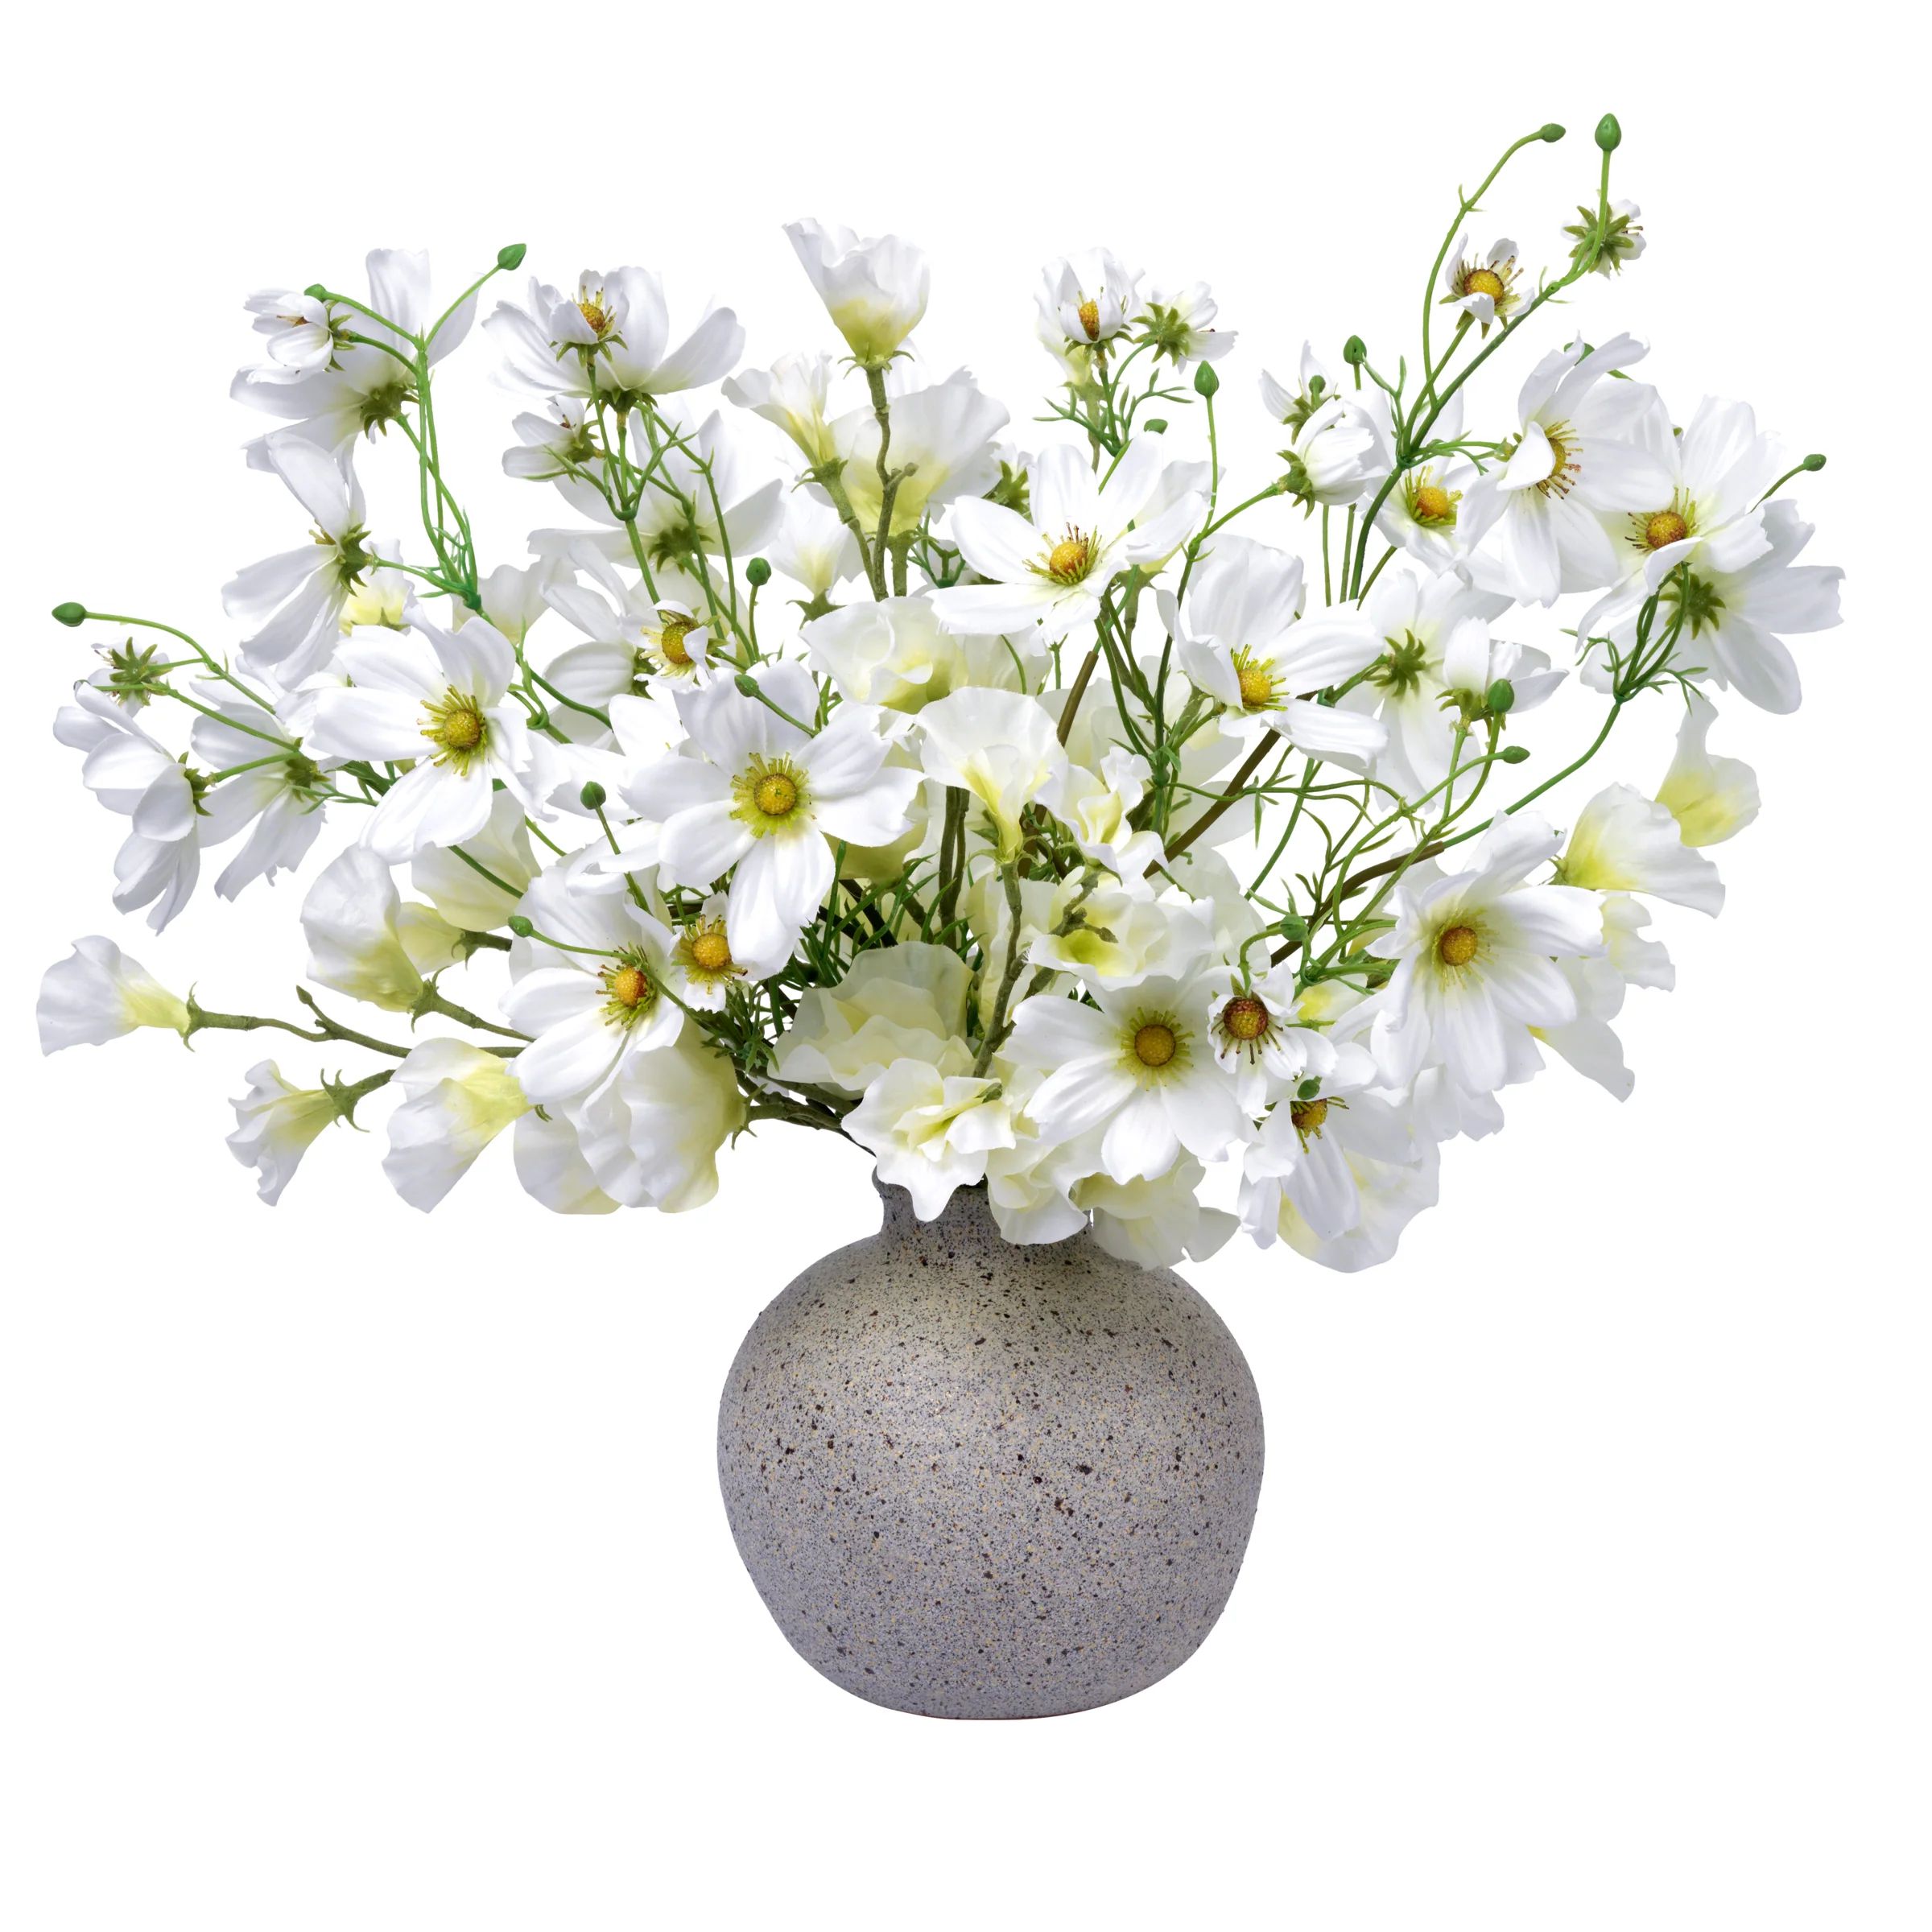 Cosmos and Sweet Pea Bouquet in Ceramic Vase | Ashley Stark Home